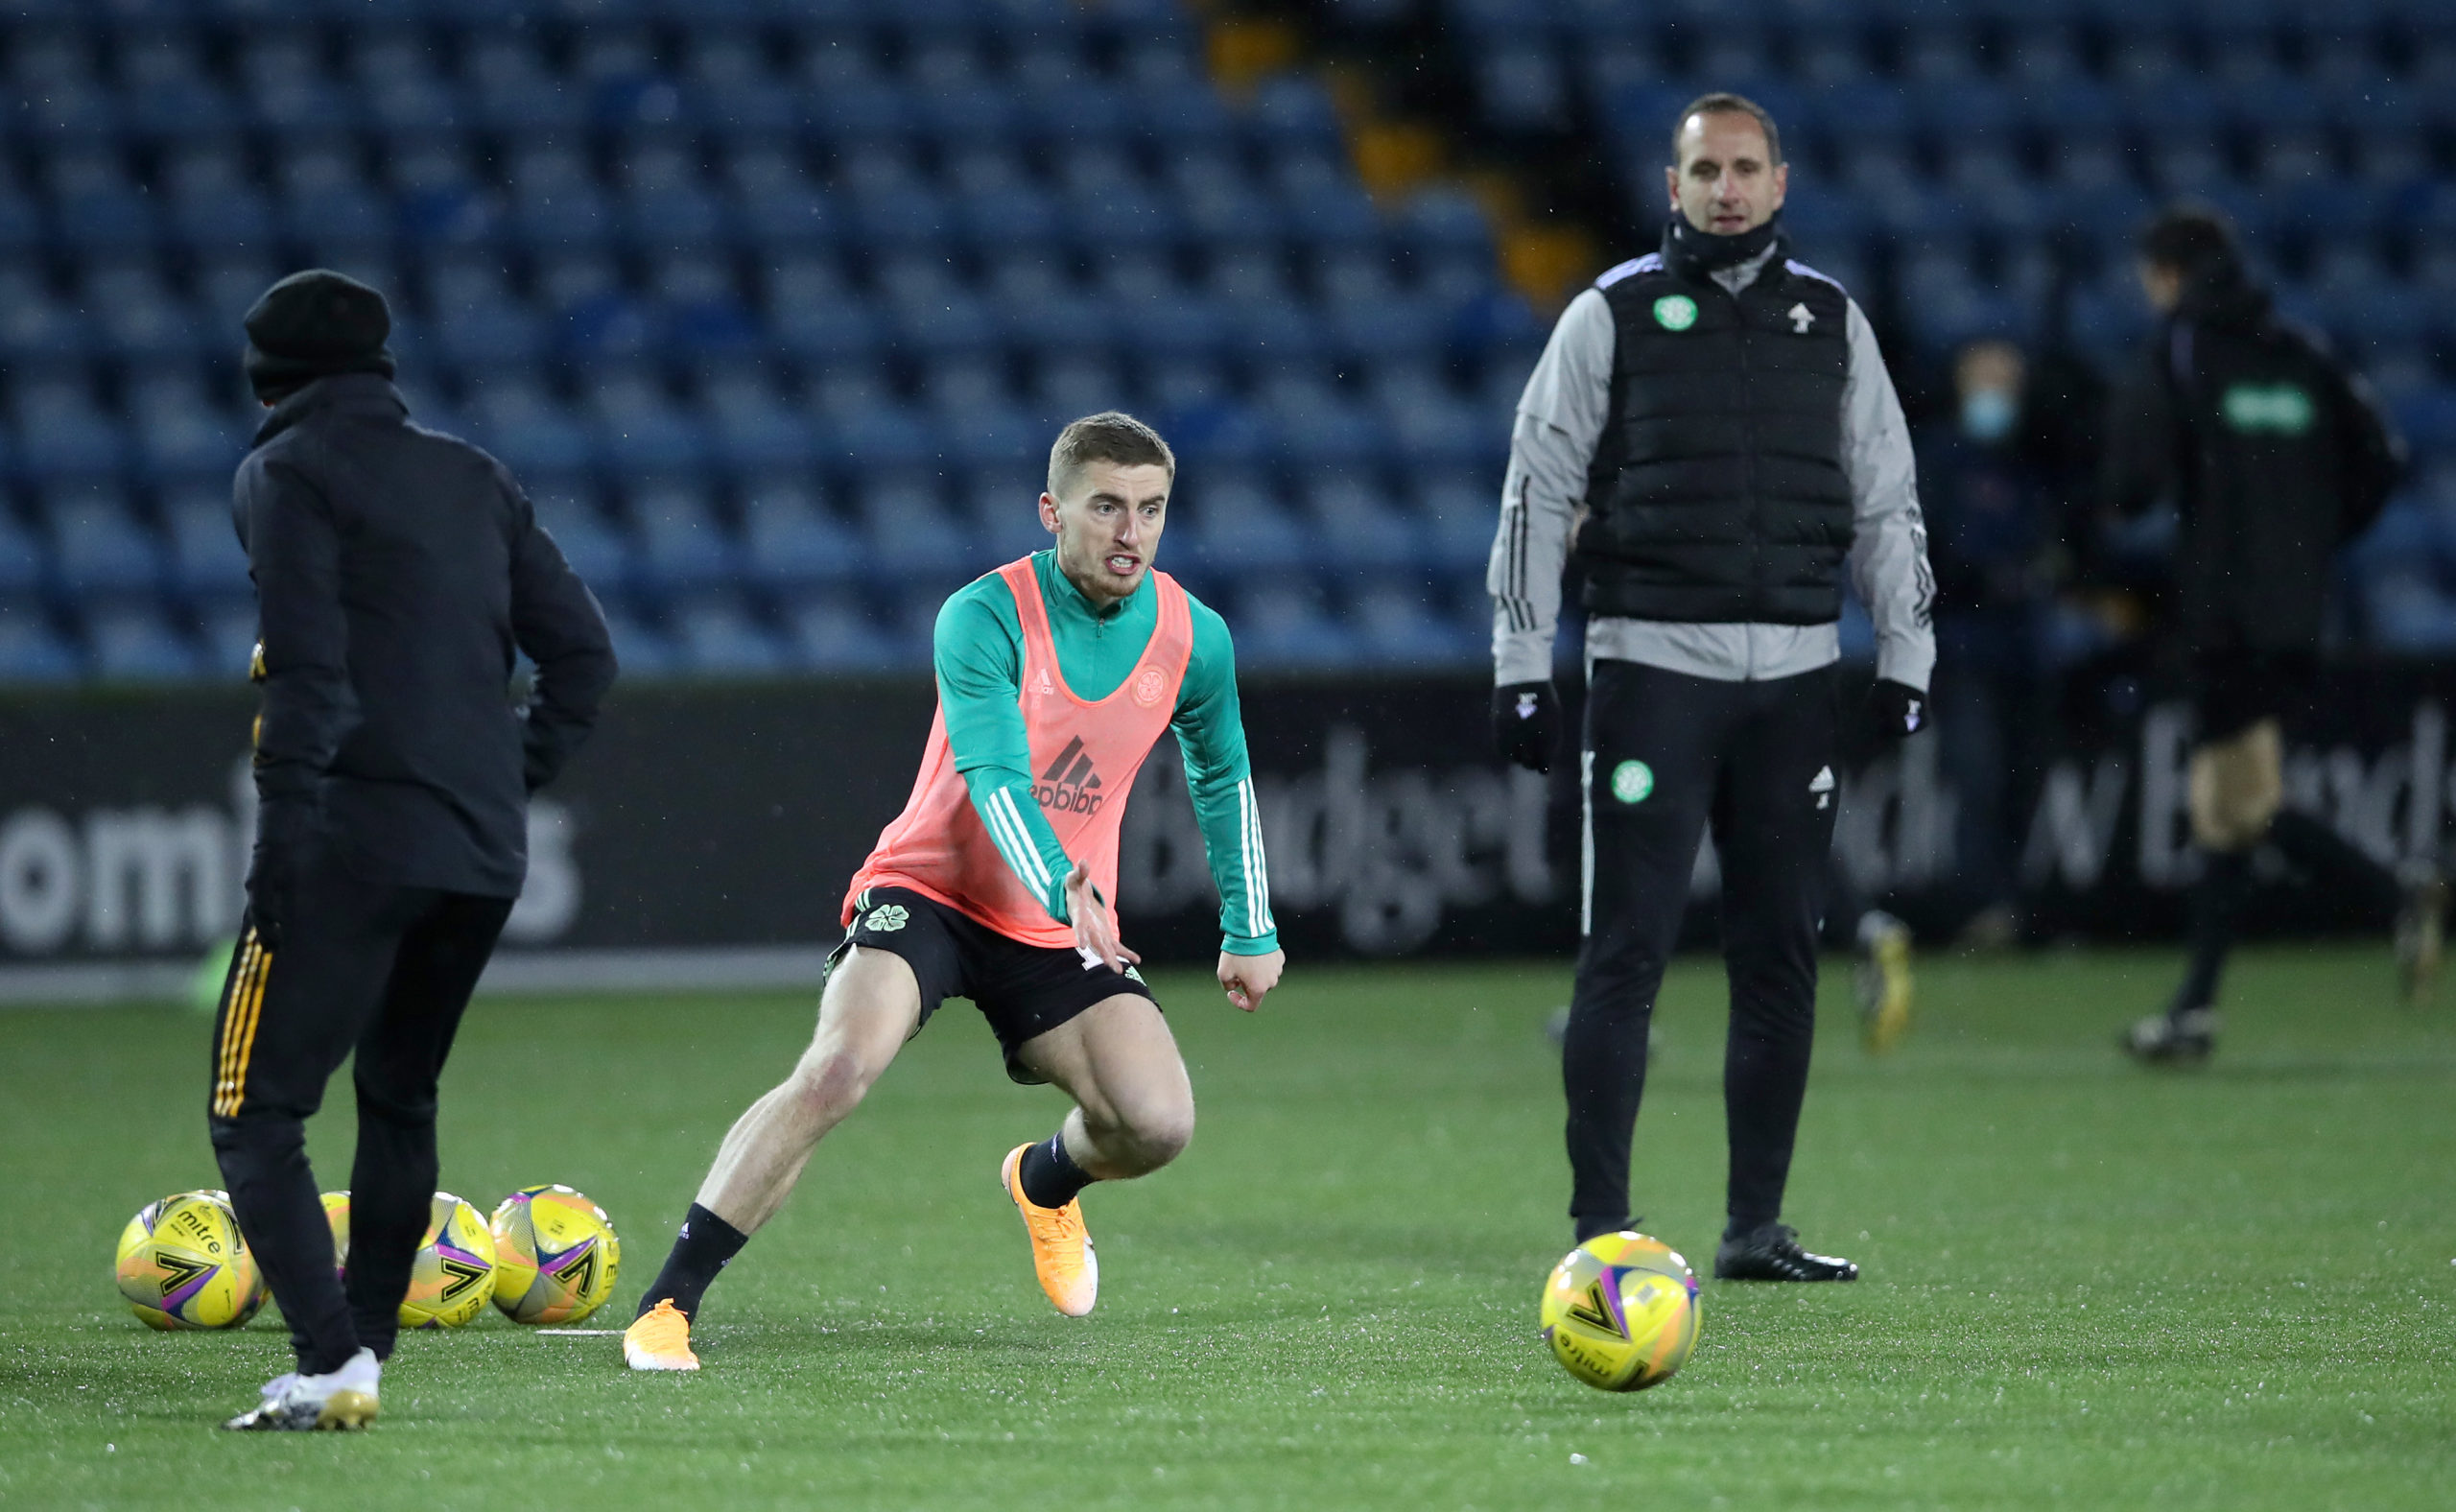 Jonjoe Kenny answers questions on his long-term future after Everton to Celtic loan switch